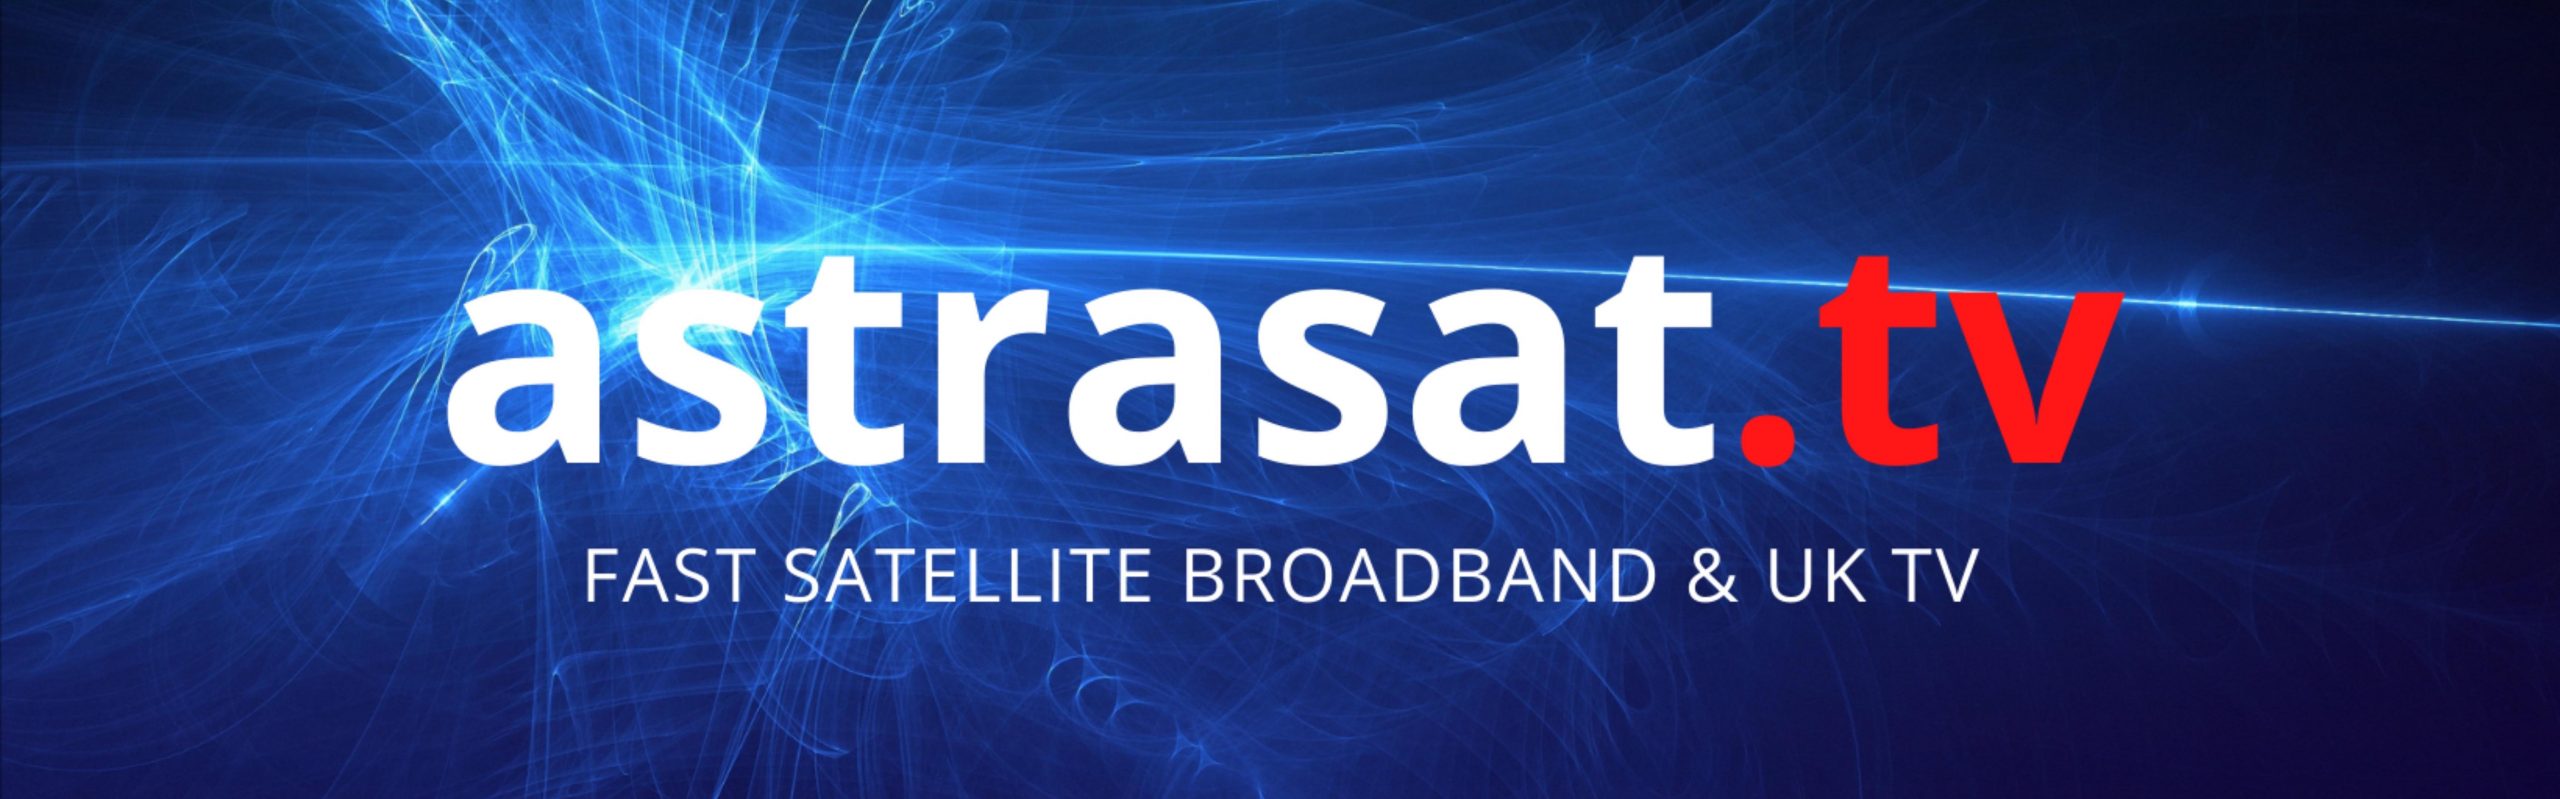 Satellite broadband and UK TV for expats in France